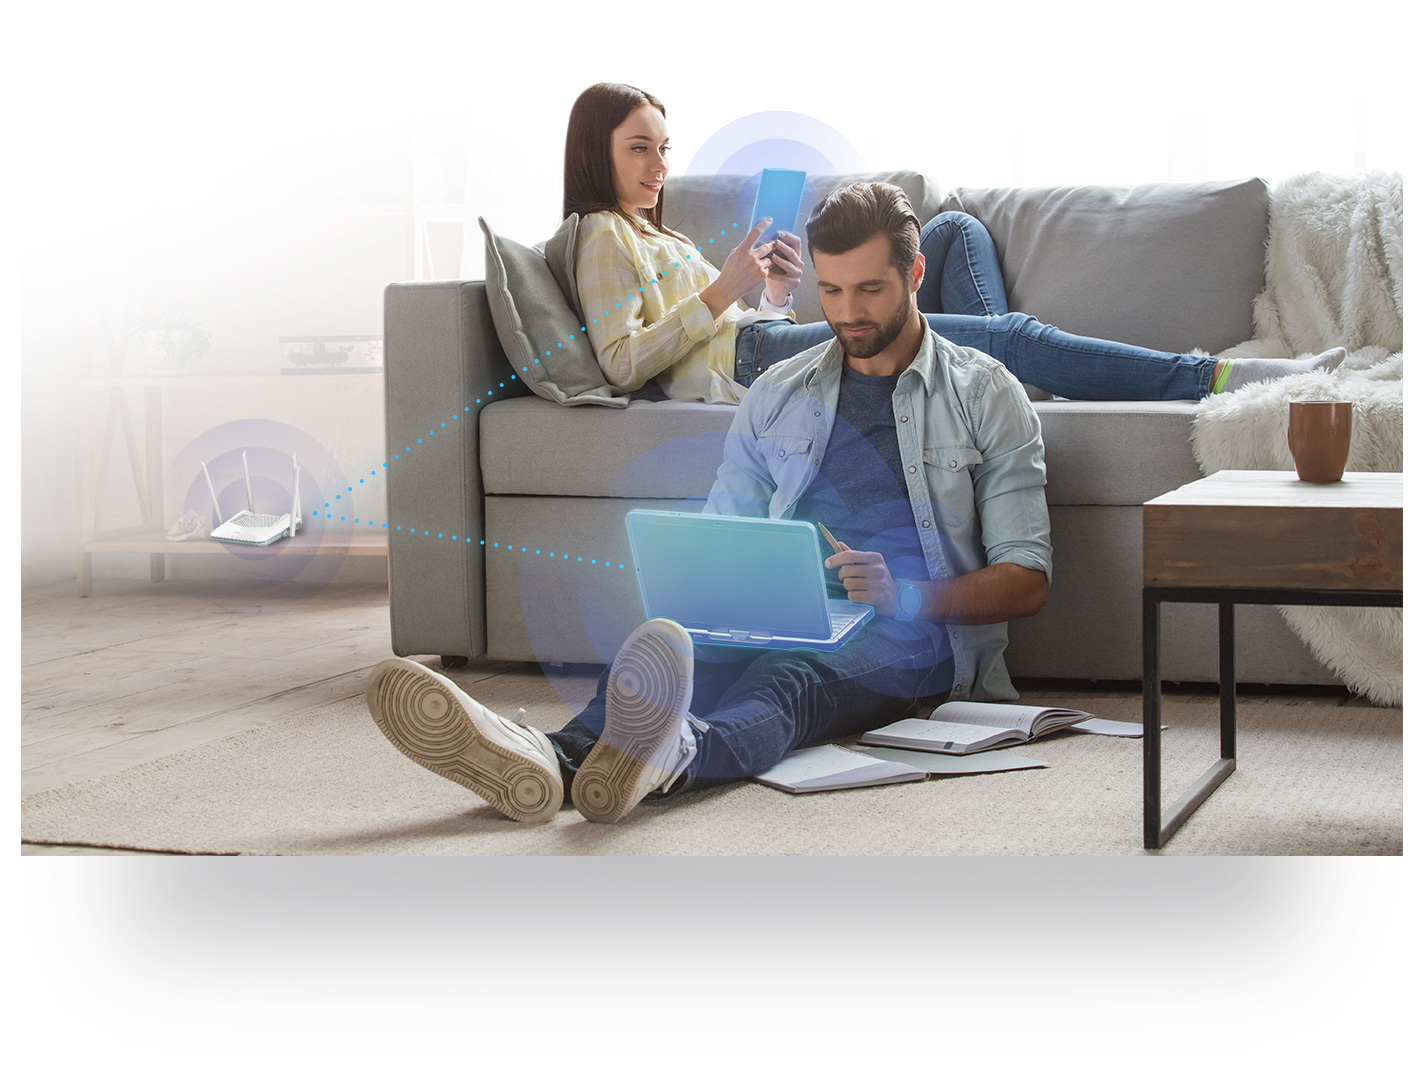 R15 EAGLE PRO AI AX1500 Smart Router connected to a man's laptop on his lap and a woman's phone being used on a sofa.